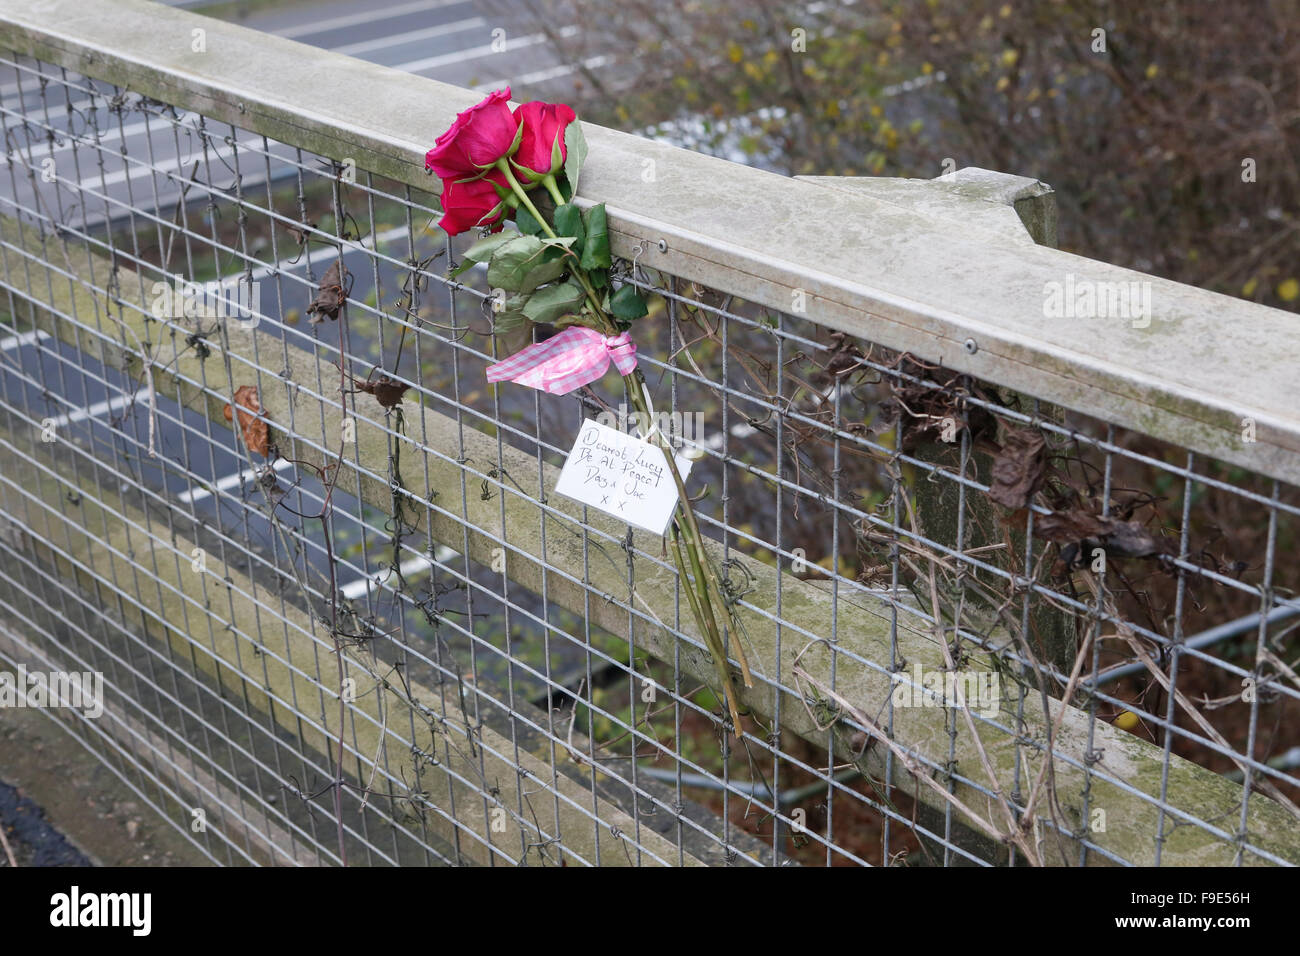 Downend Bridge, Hampshire, UK. 16th Dec, 2015. Attached to Downend Bridge is a single bunch of red roses tied with a pink ribbon, the only reminder of yesterday's tragic accident in which a woman died after falling from the bridge which crosses the M27. The flowers have a small gold card attached to them with the words “Dearest Lucy Be at Peace Daz and Jac XX”, a poignant reminder of a tragic waste of life. Police closed two lanes of the motorway on Tuesday afternoon and motorists endured traffic chaos. Credit:  uknip/Alamy Live News Stock Photo